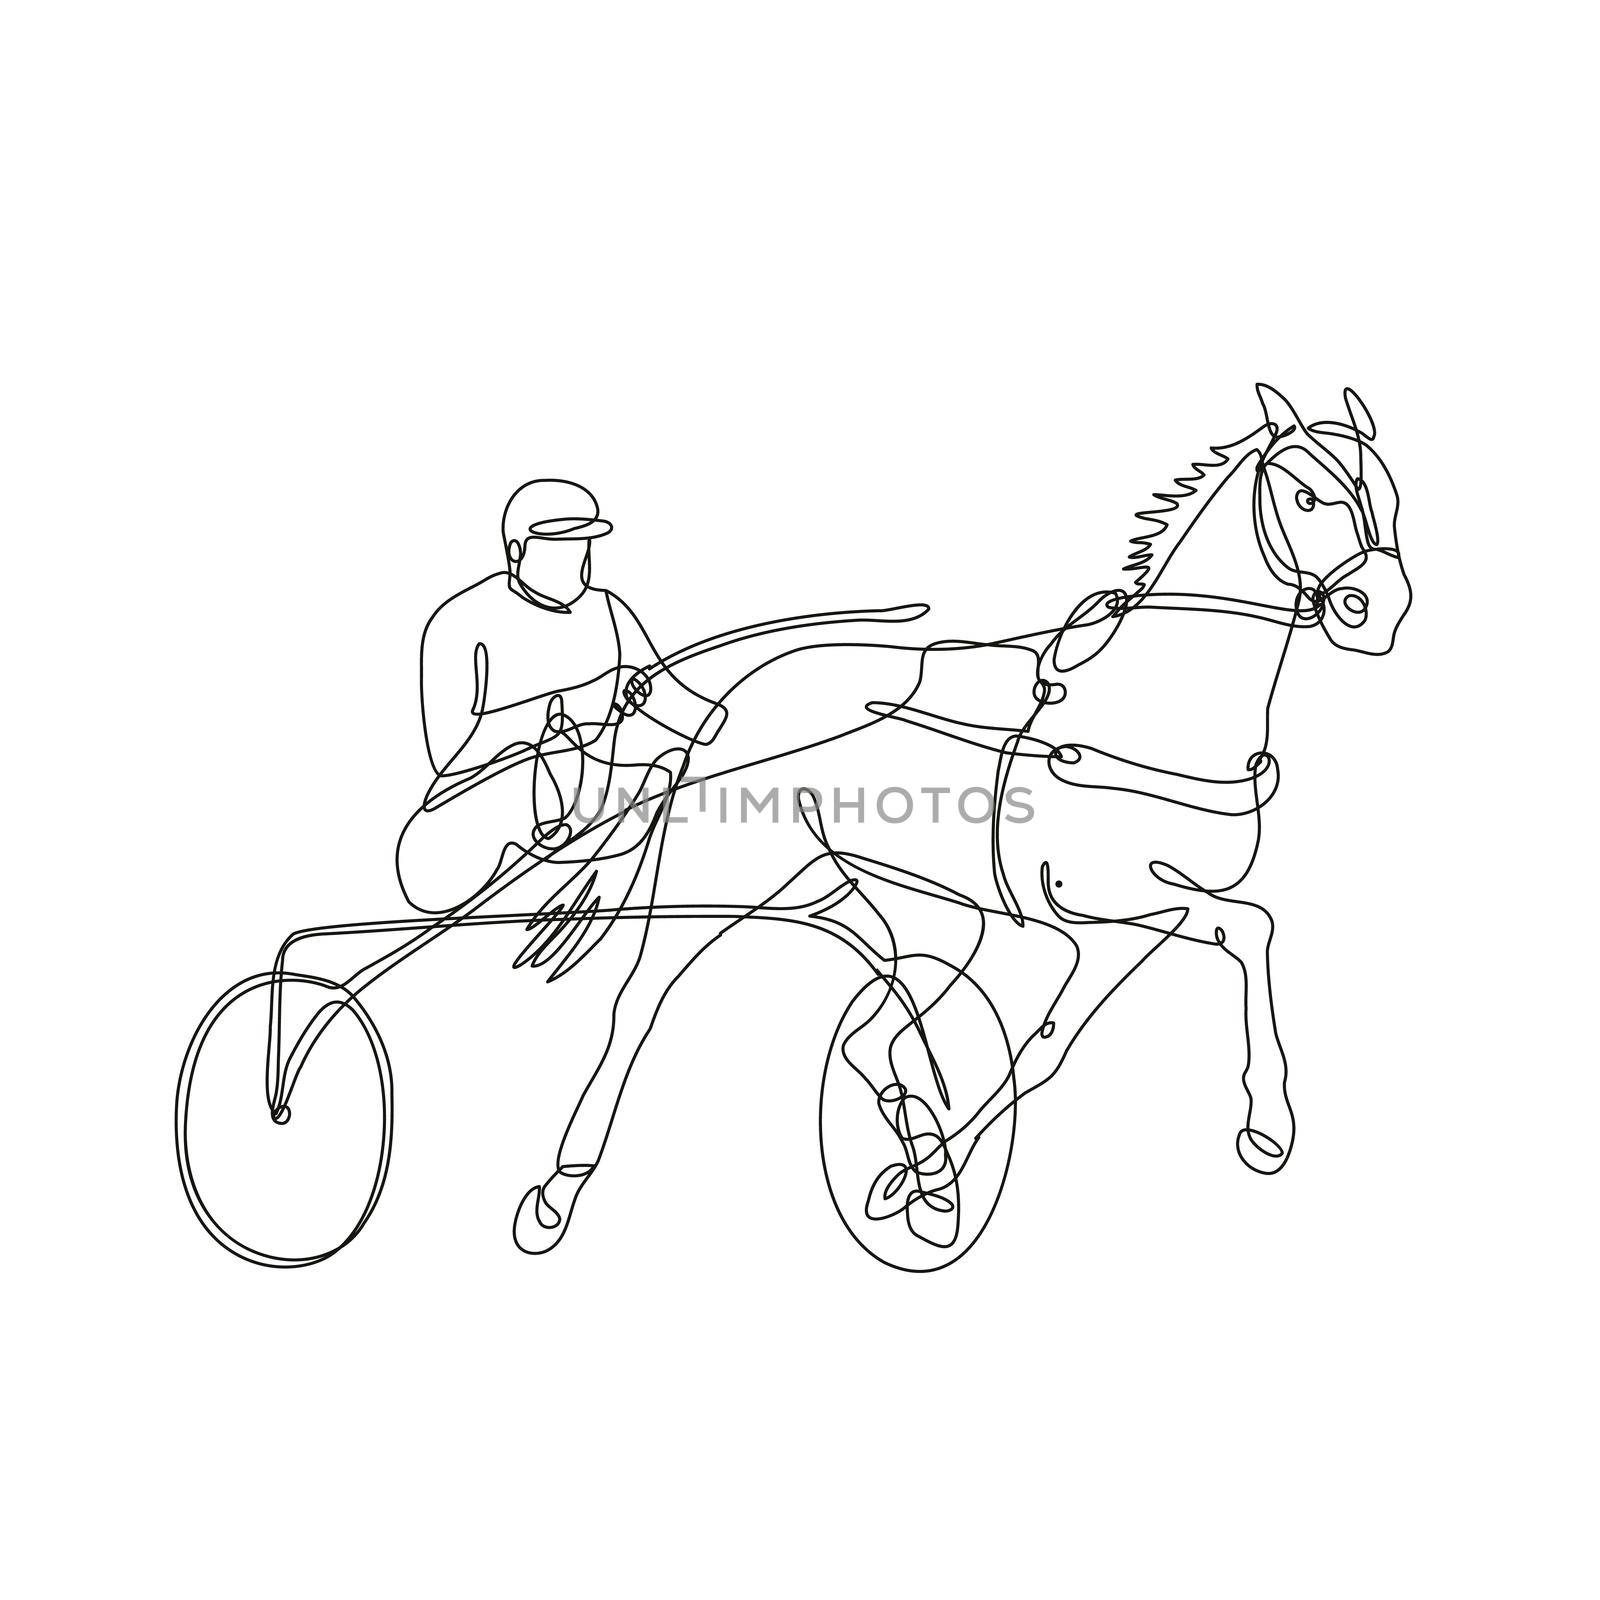 Continuous line drawing illustration of a jockey and horse harness racing side view inside circle done in mono line or doodle style in black and white on isolated background. 